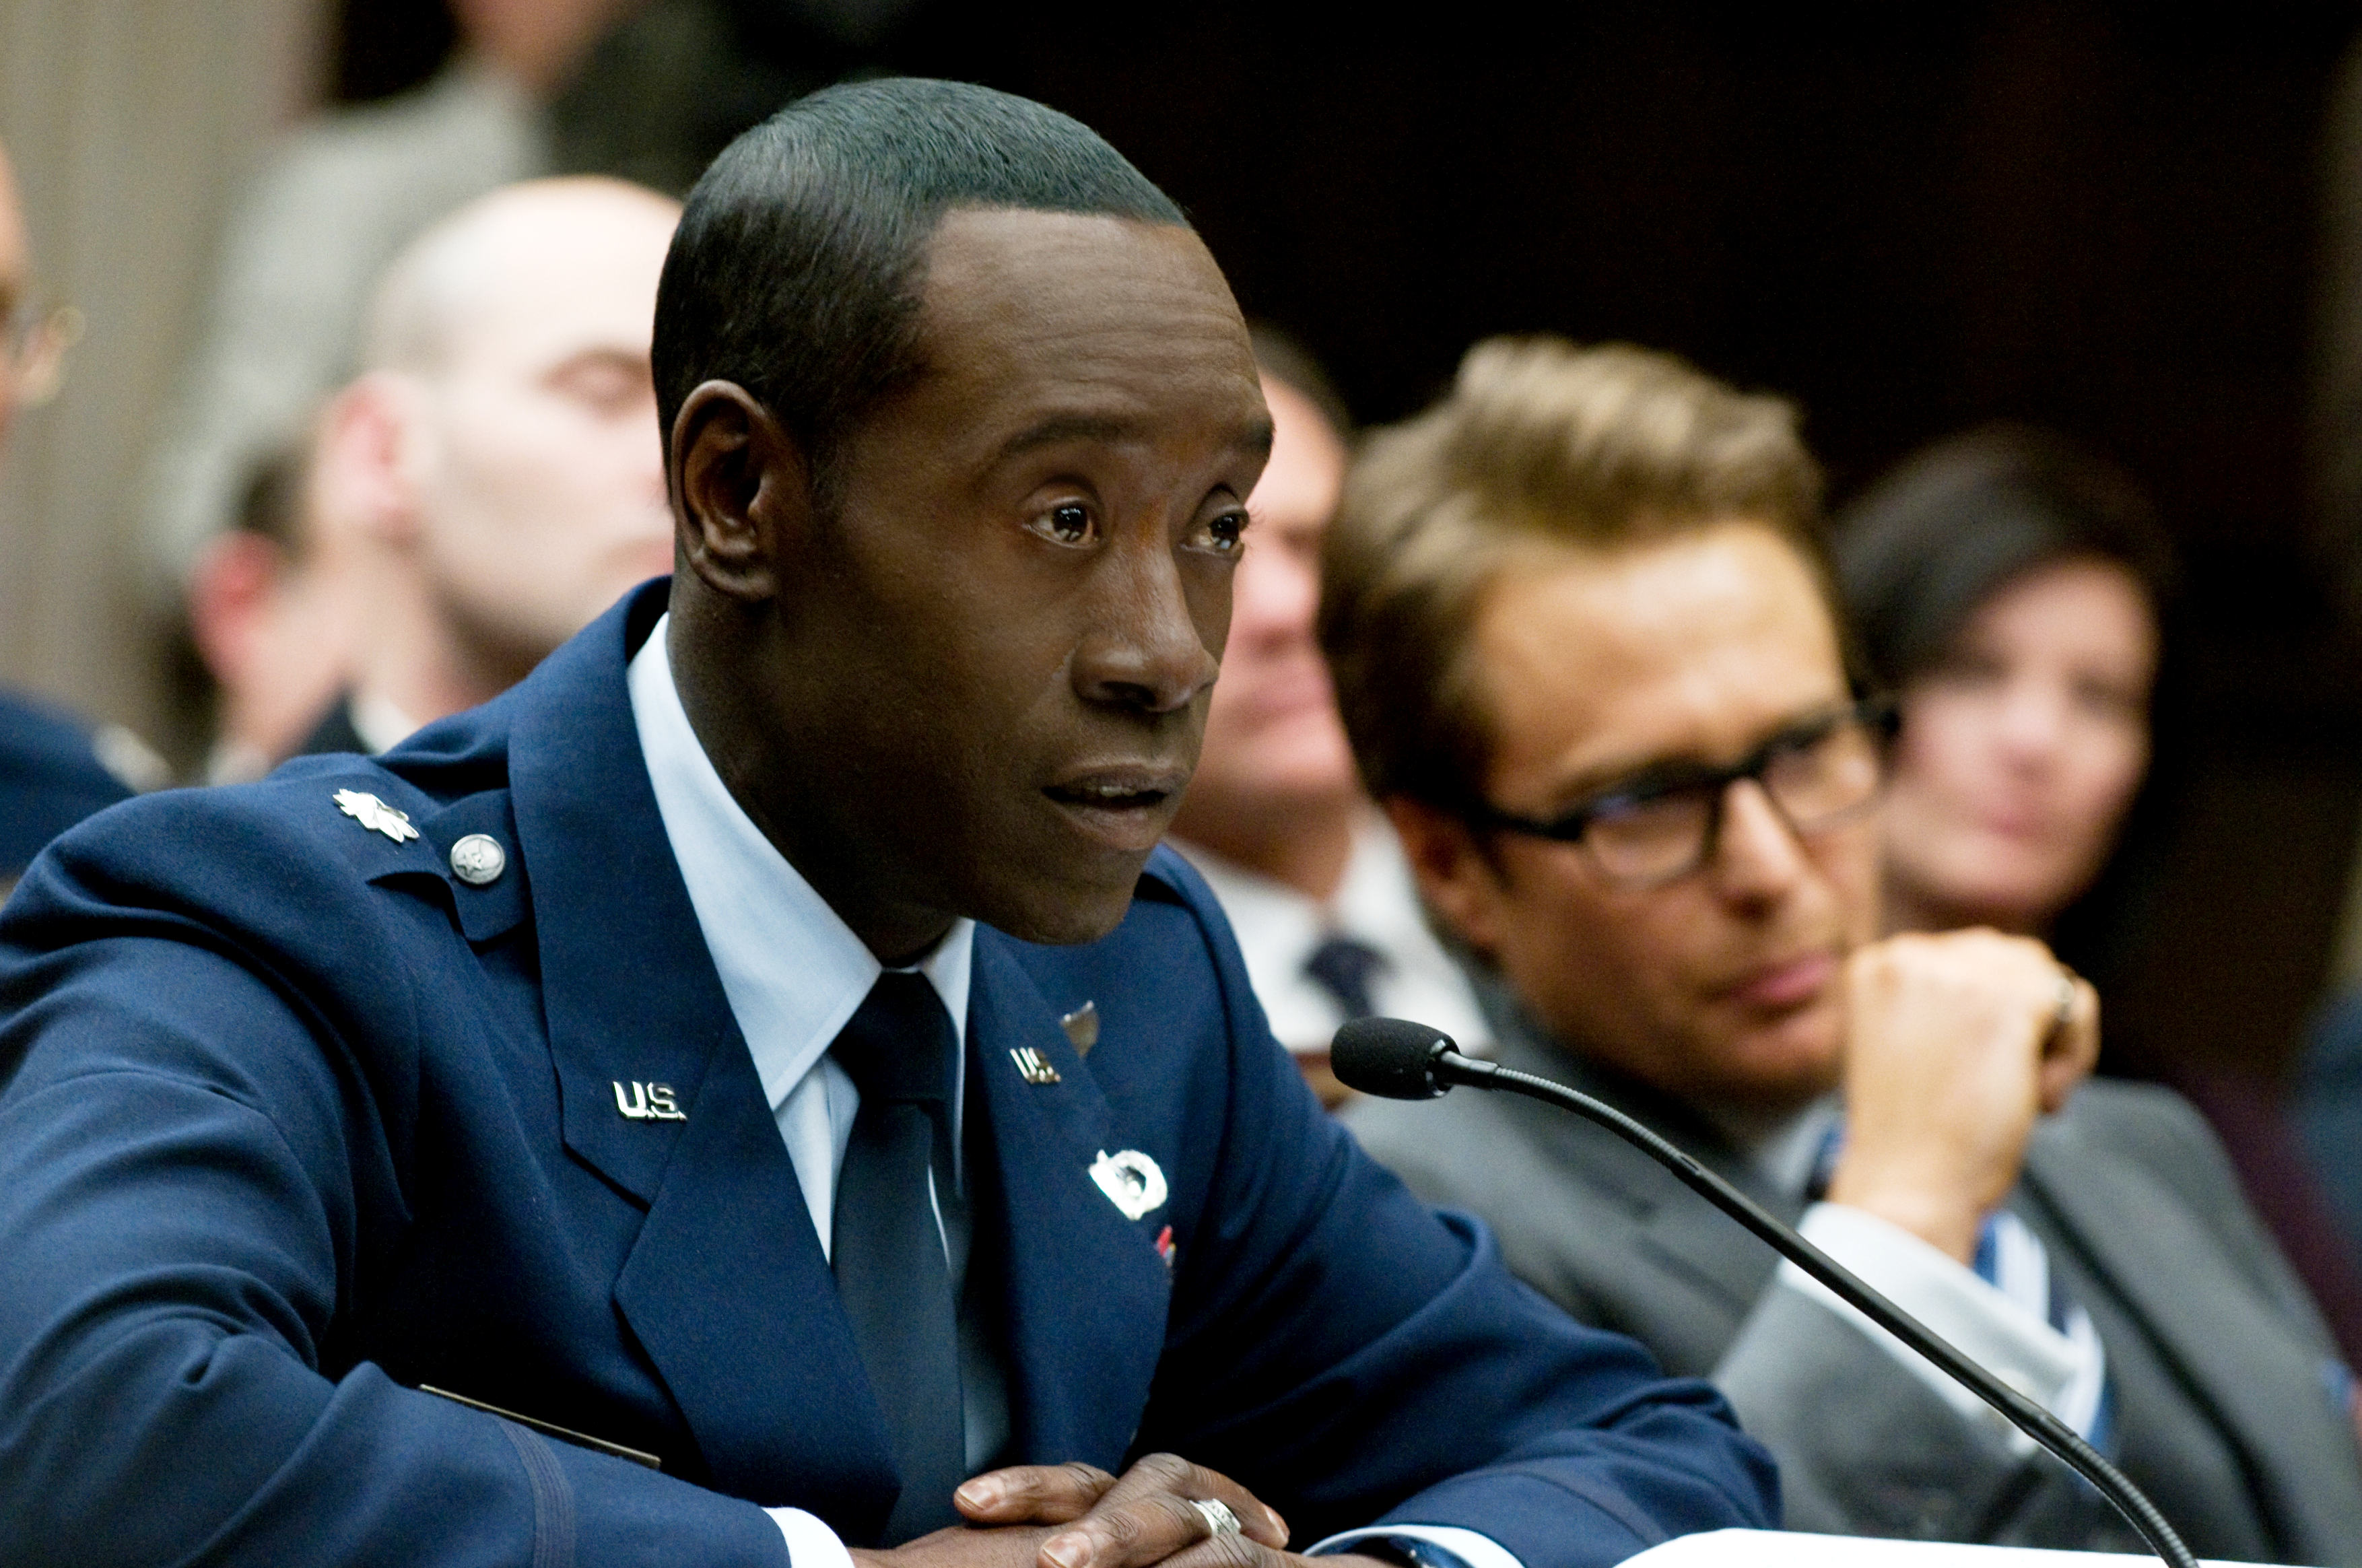 Don Cheadle stars as Col. James 'Rhodey' Rhodes in Paramount Pictures' Iron Man 2 (2010). Photo credit by Merrick Morton.